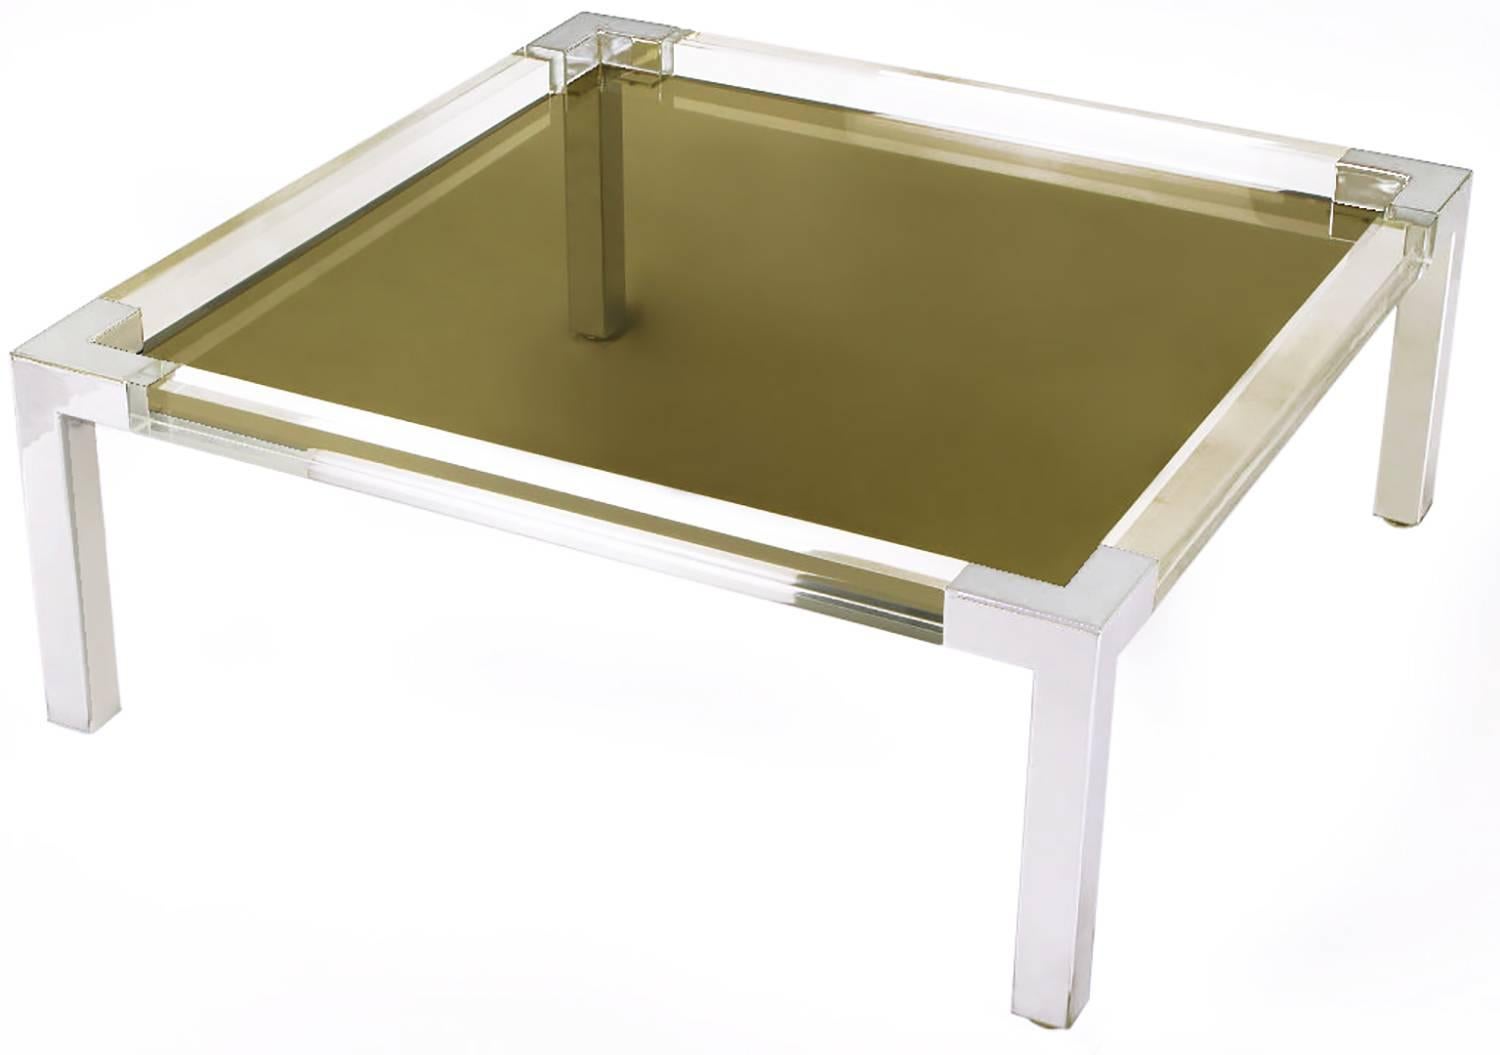 Square form coffee table with chromed metal legs and corners, Lucite side rails and recessed smoked glass top. Similar to designs by Karl Springer and Charles Hollis Jones.